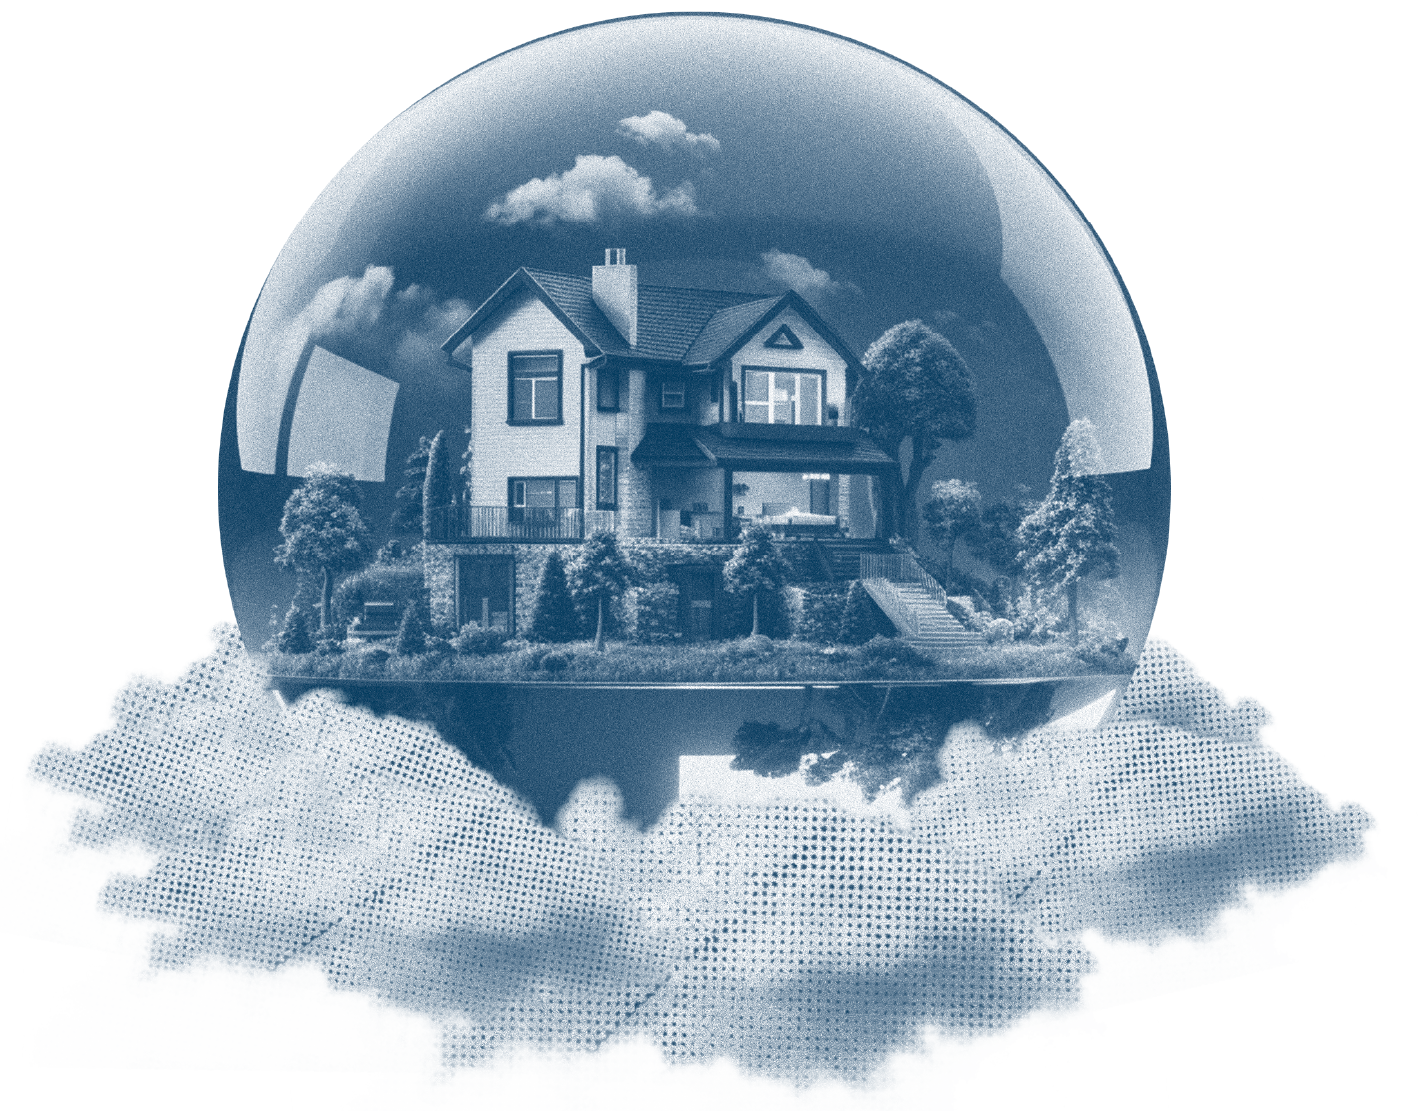 Residential home wrapped around globe, floating in clouds